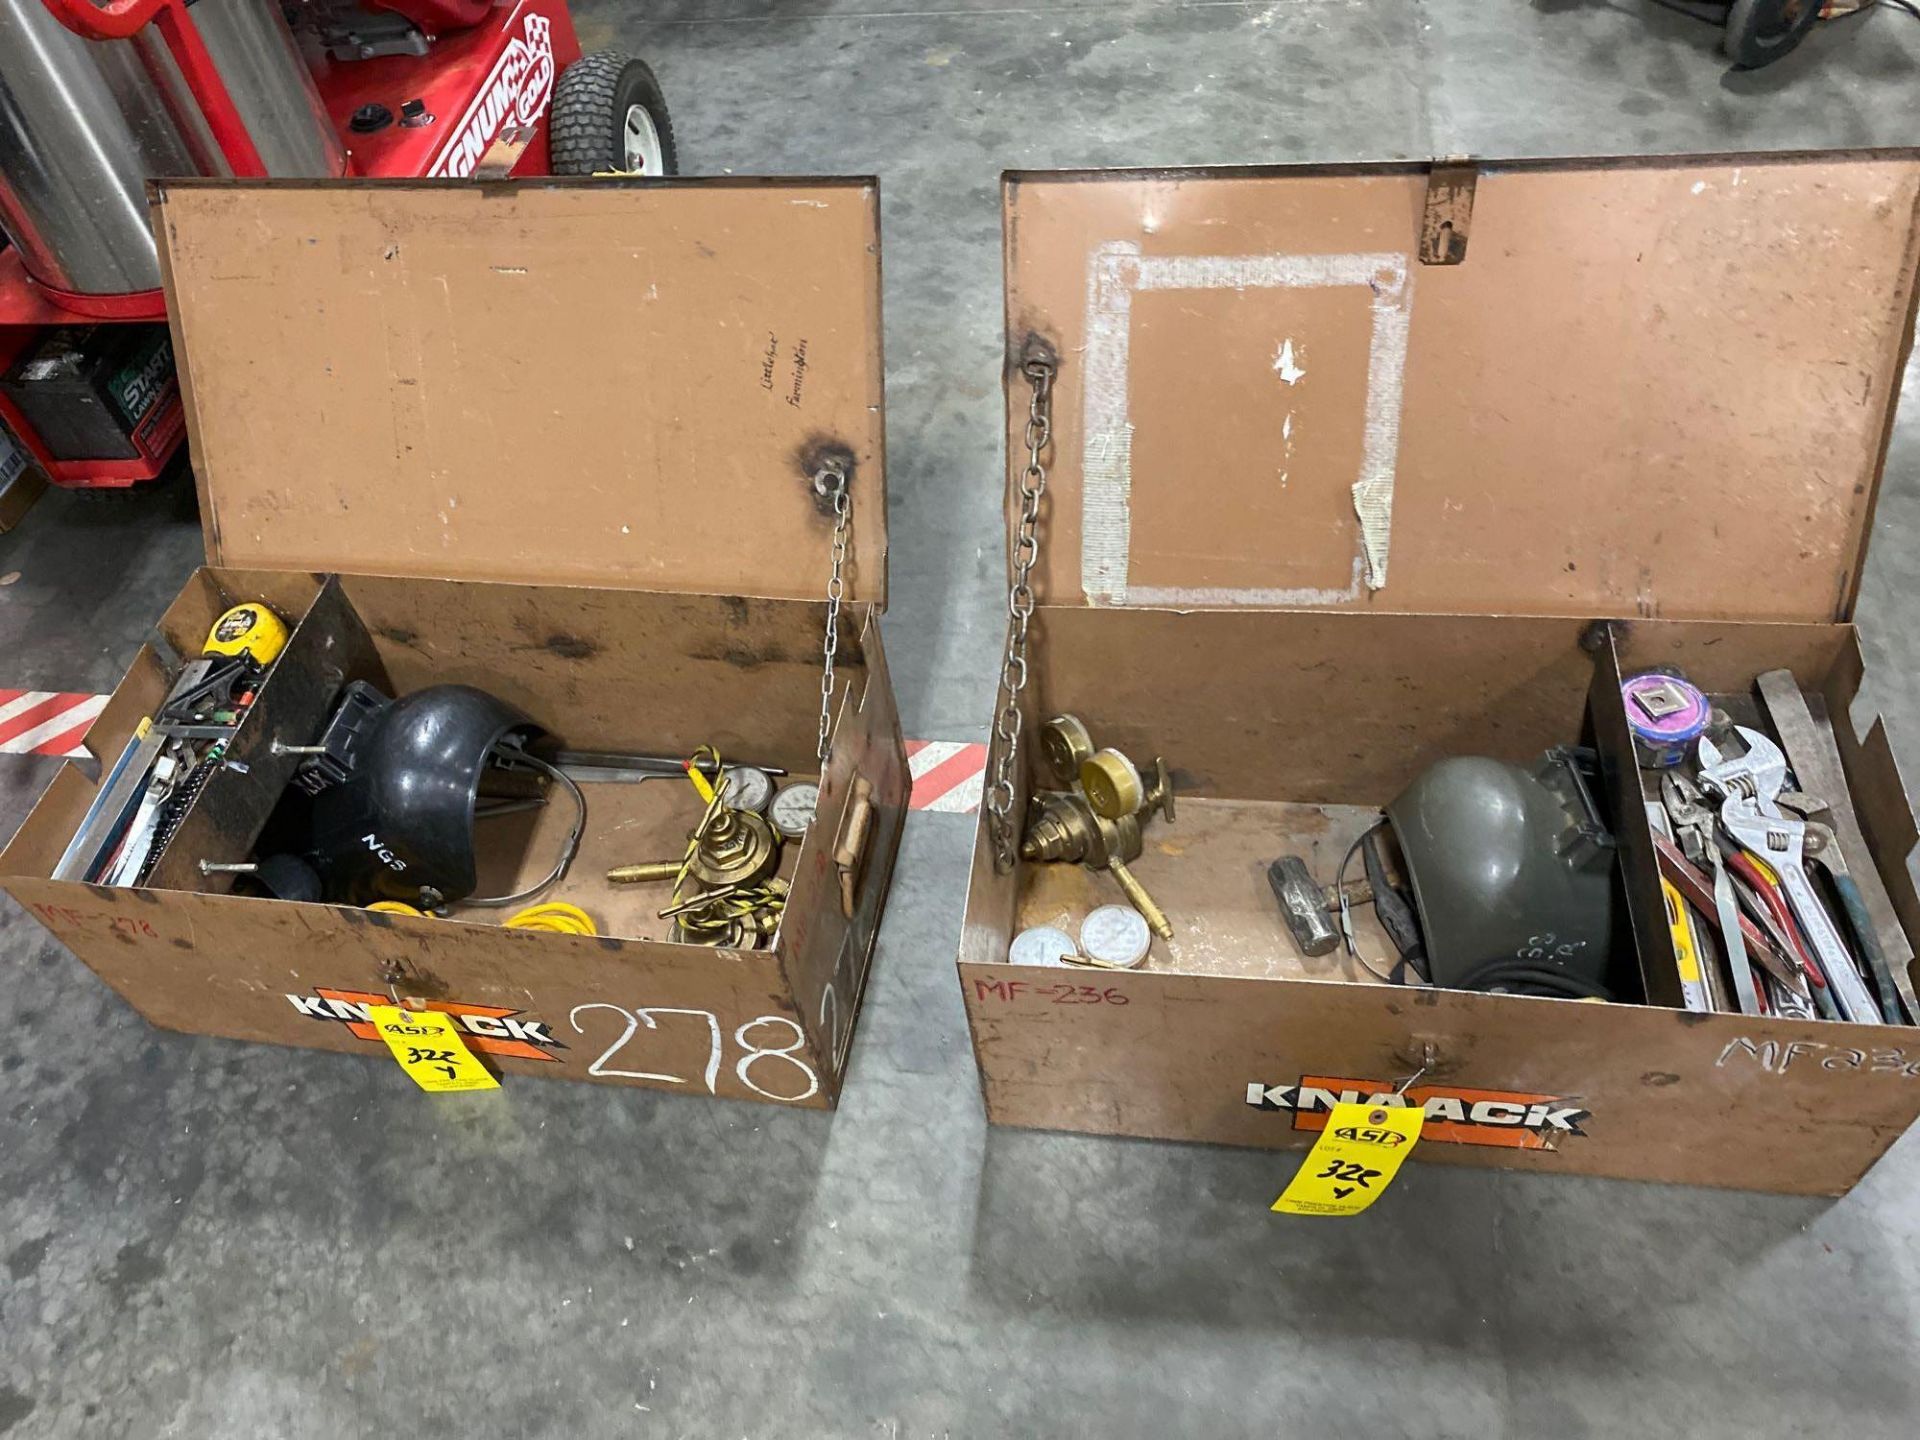 TWO KNACK BOXES WITH WELDING SUPPLIES - Image 2 of 6